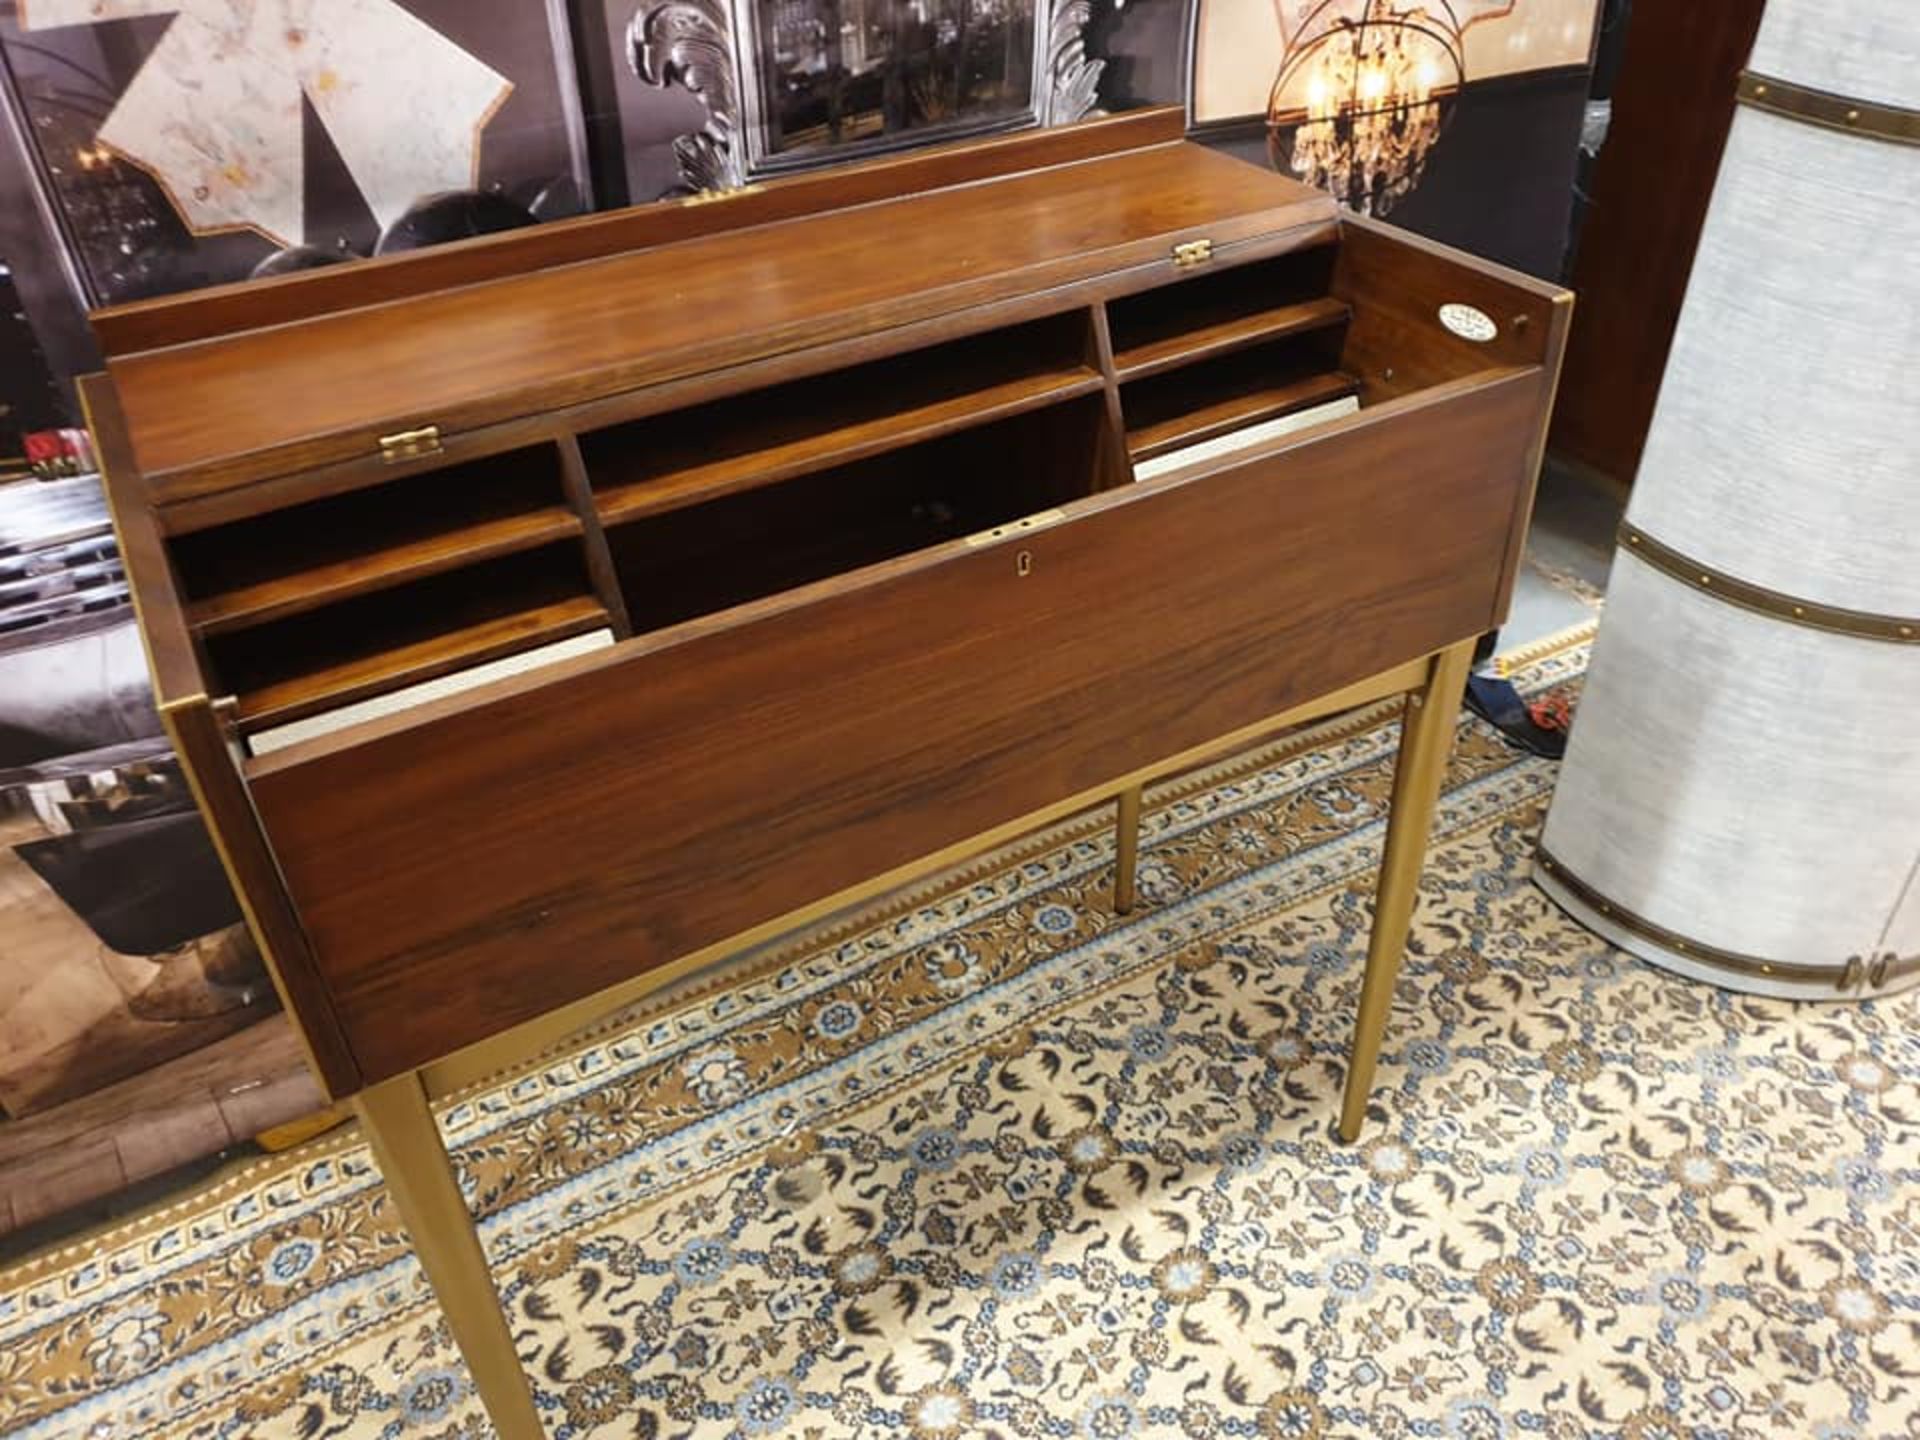 Starbay Acacia Walnut campaign writing desk with Brass trim and brass legs with leather strapping - Image 6 of 7